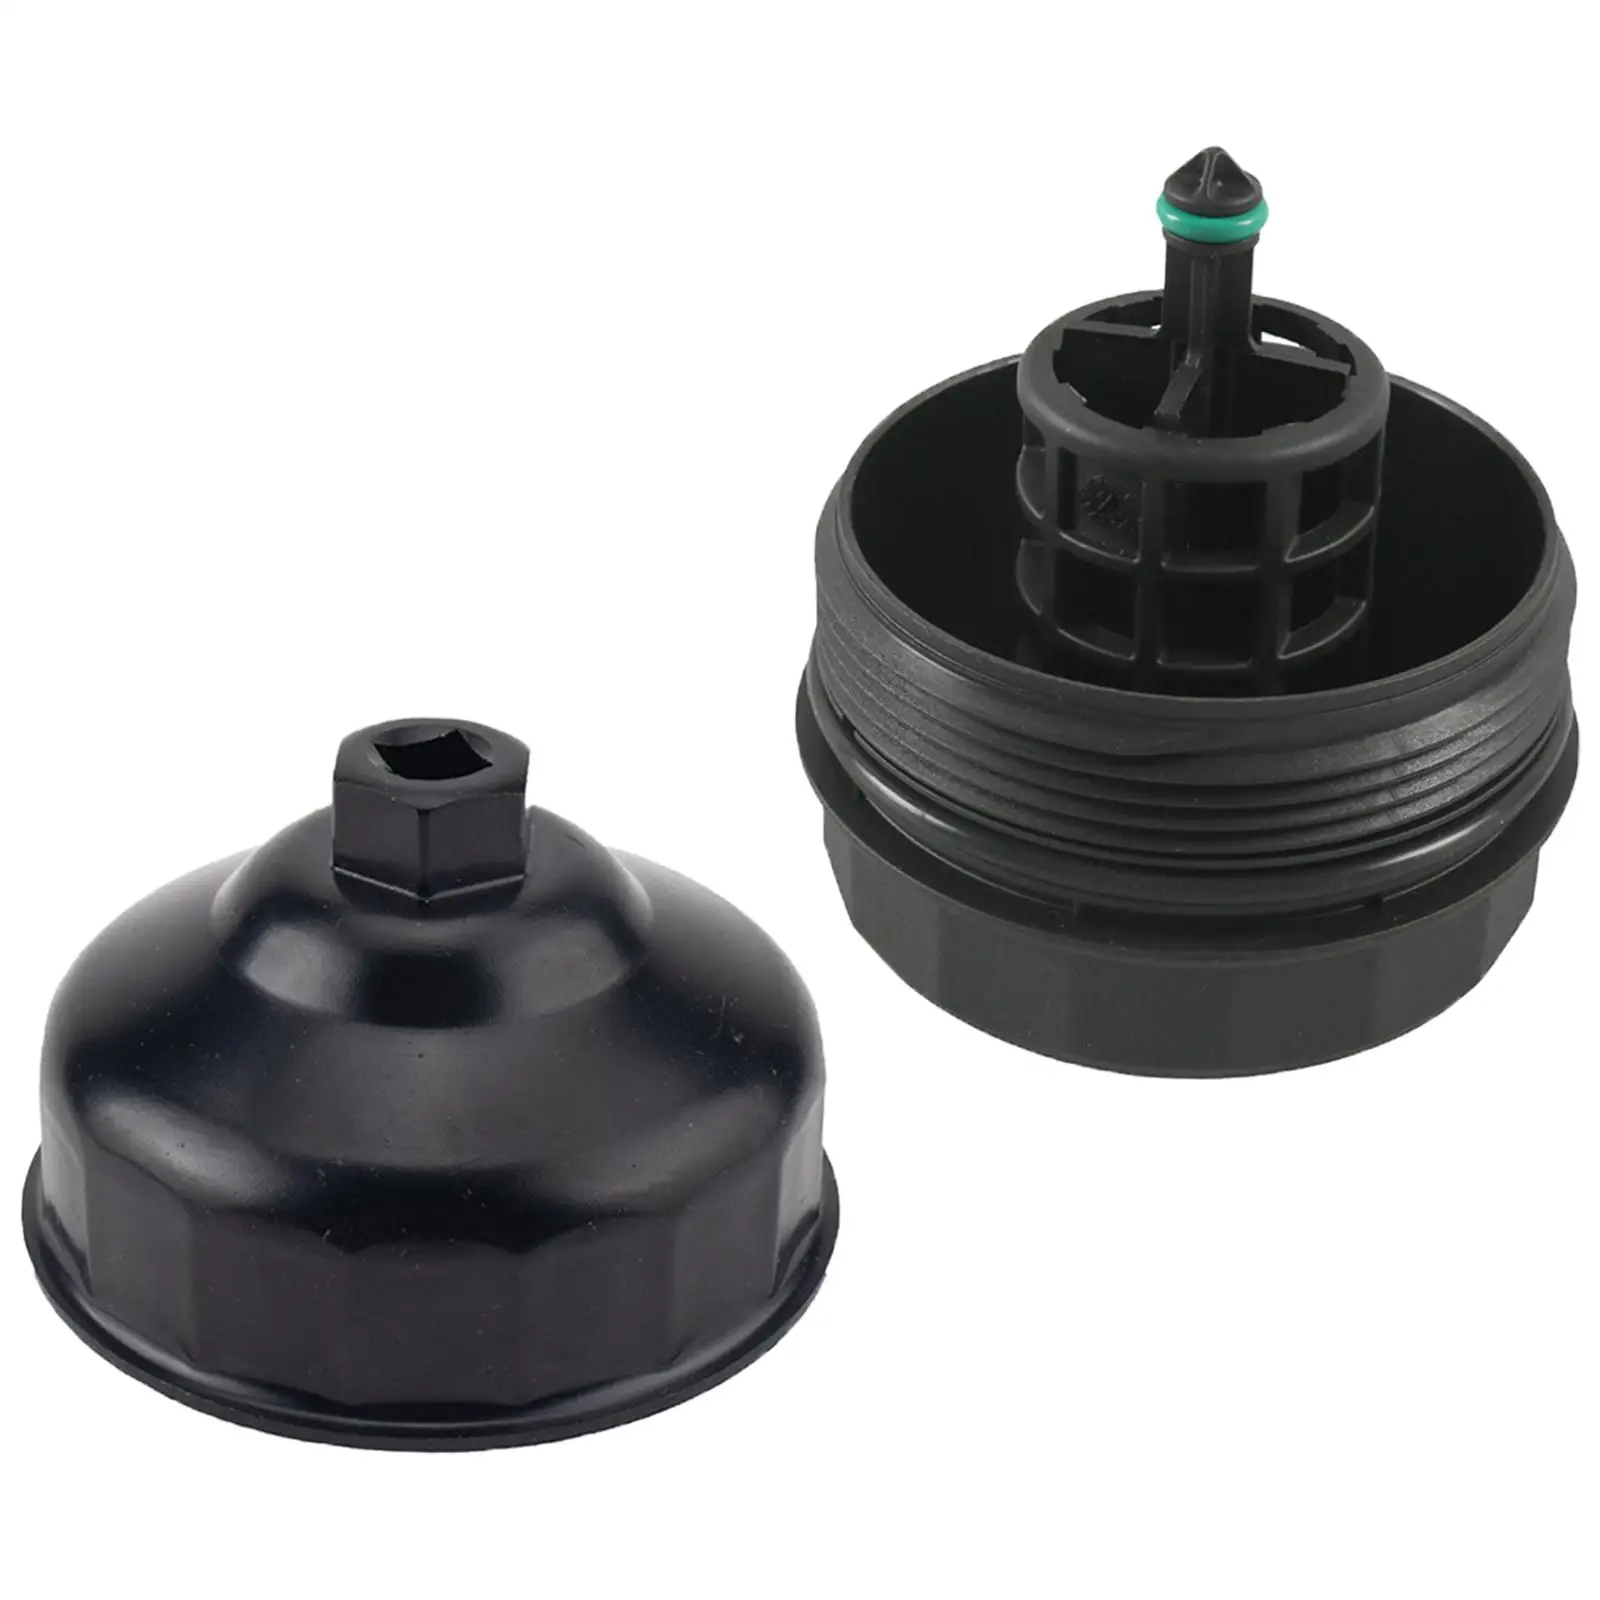 Oil Filter Housing Cover Caps, 11427525334 Replacement Fits for  x1 x3 x4 x5 x6